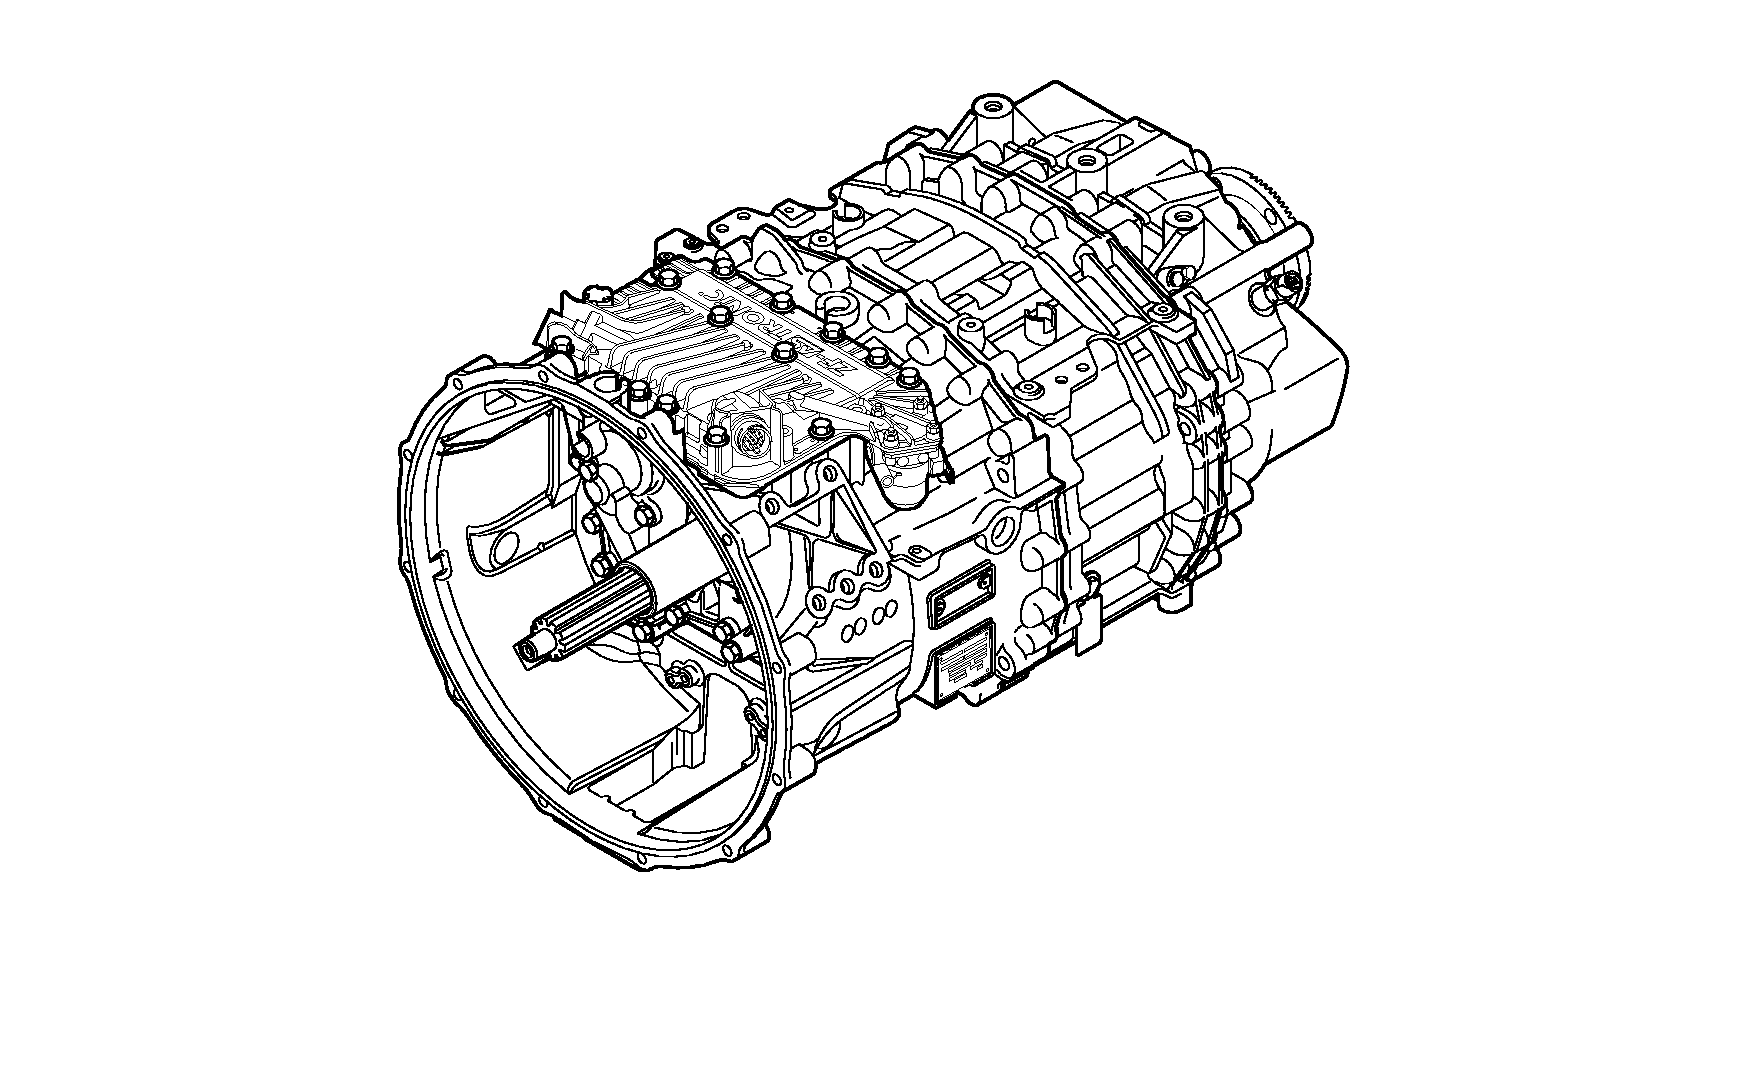 drawing for DAF 1600868 - ANBAUTEILE (figure 2)